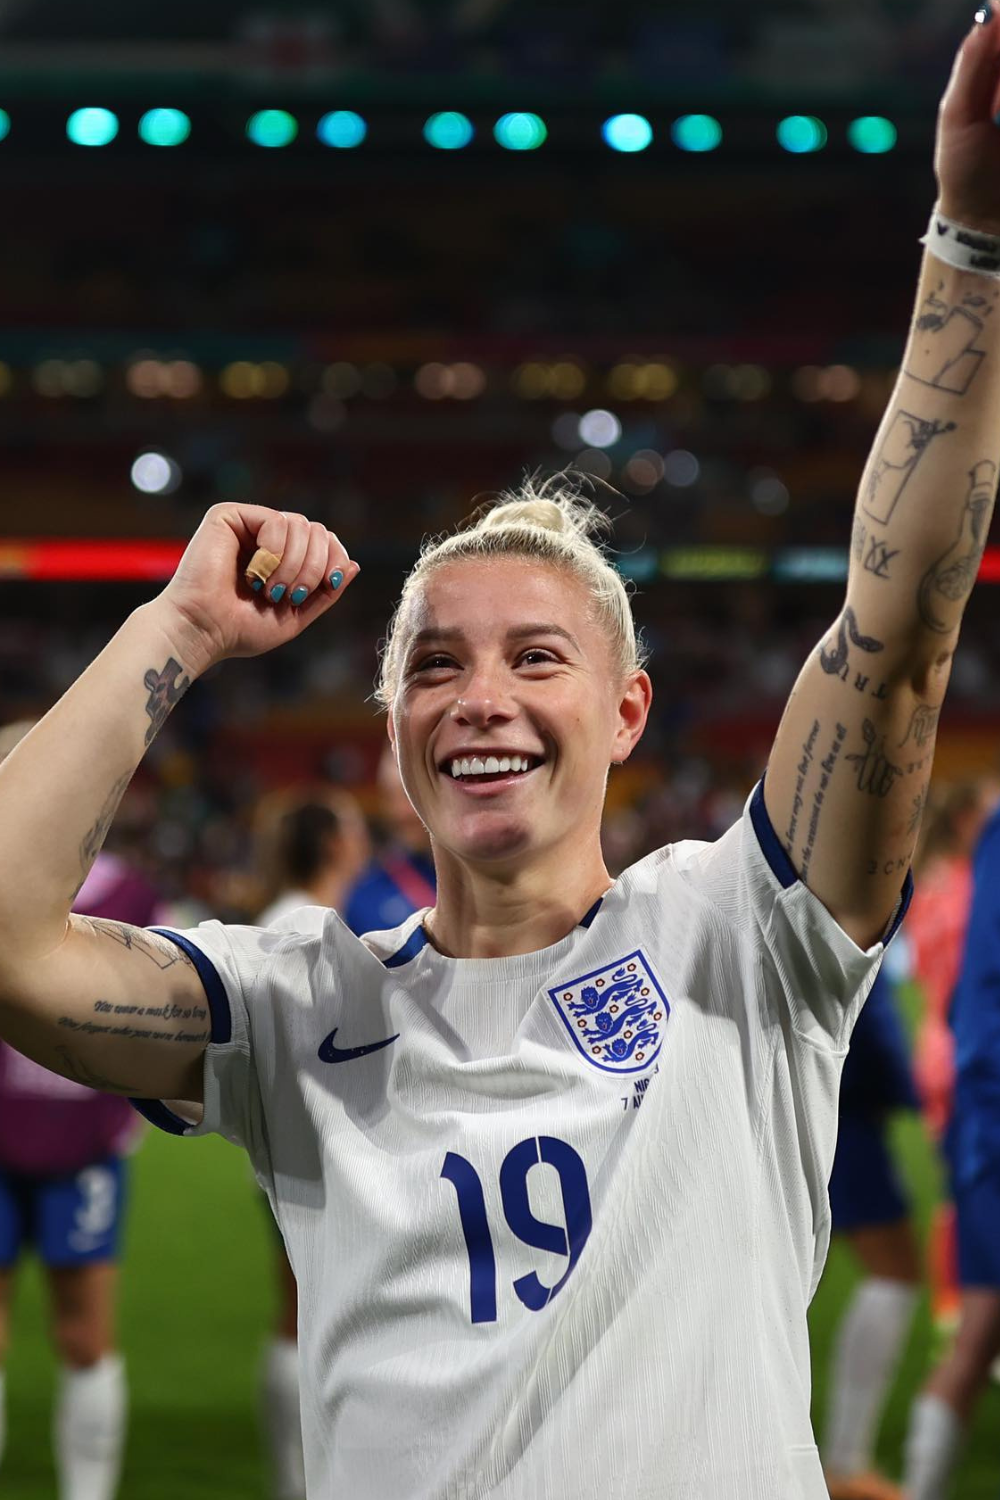 Bethany England, A Professional Soccer Player Representing England's Women's National Soccer Team